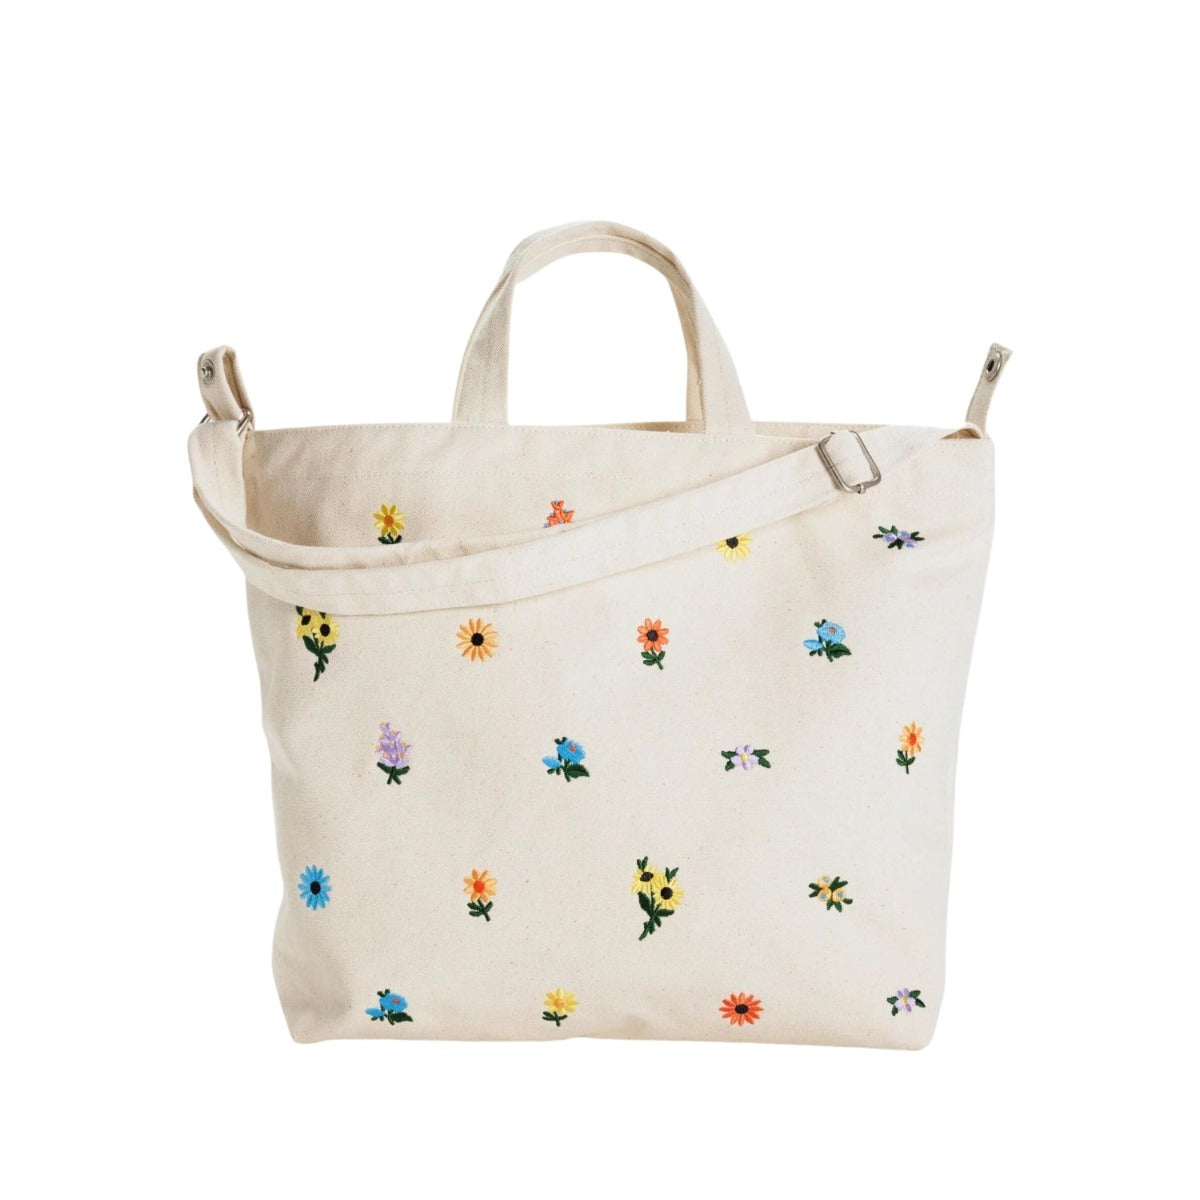 Baggu Horizontal Zip Duck Bag in Embroidered Ditsy Floral